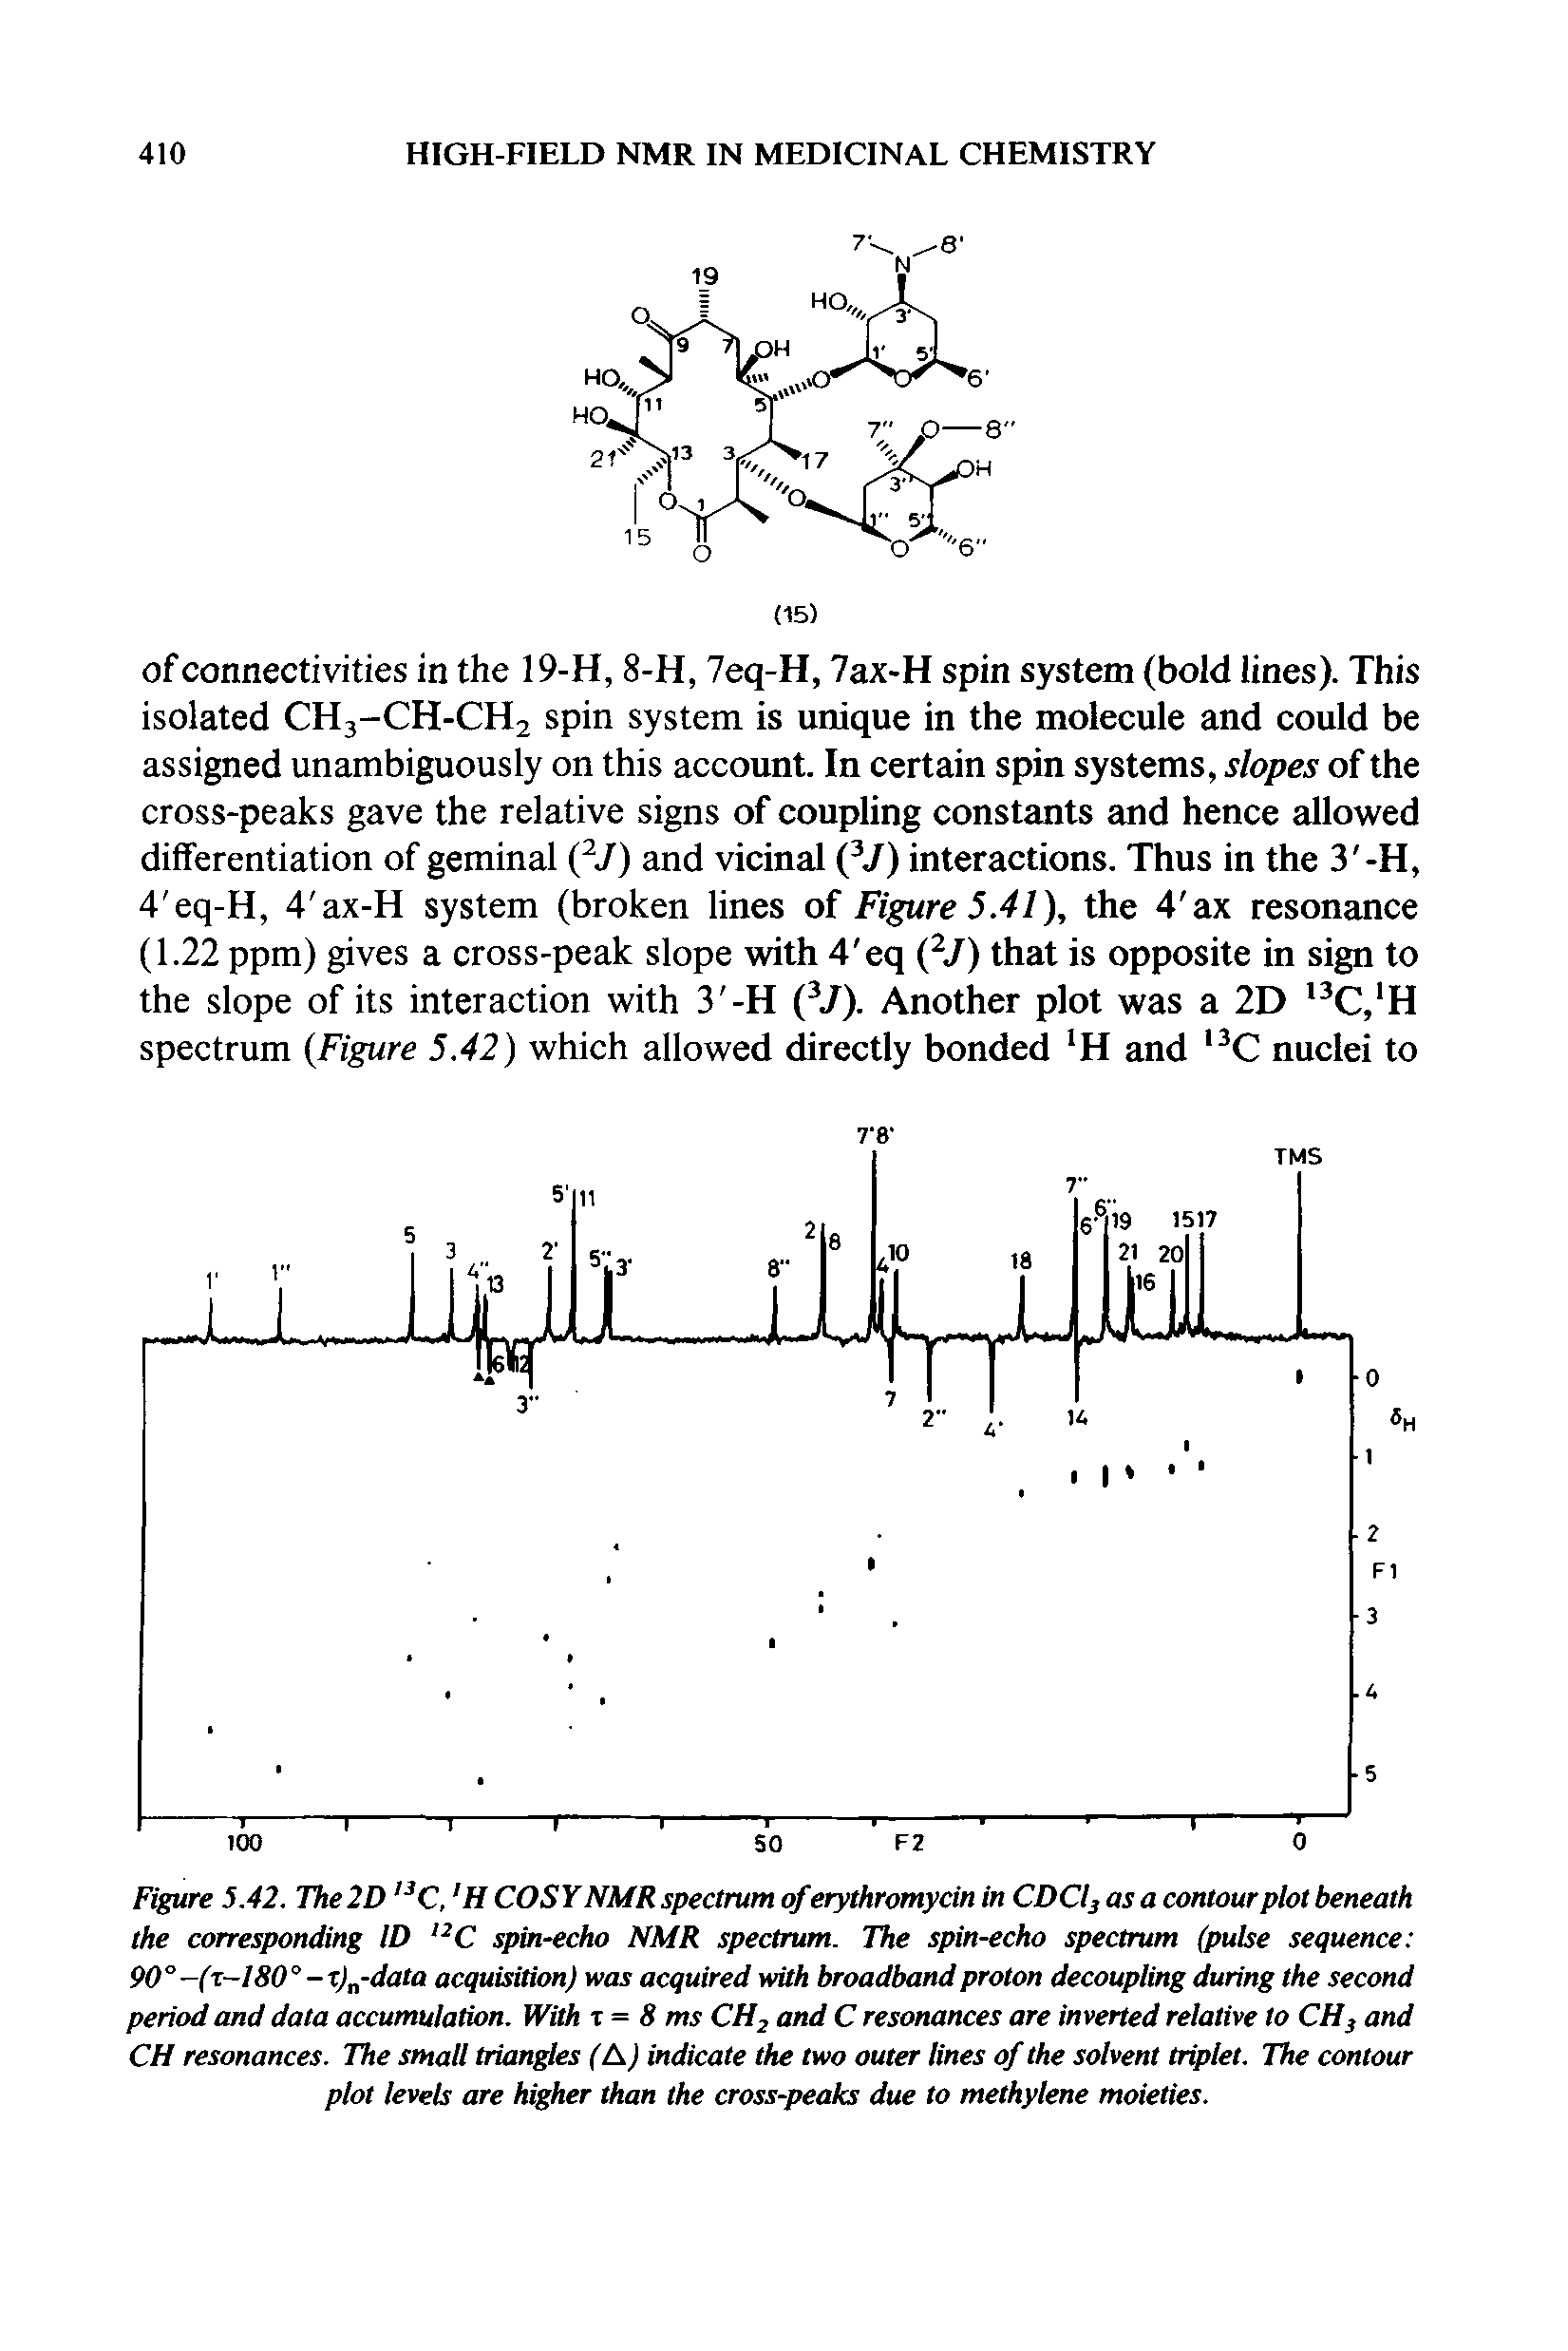 Figure 5.42. The 2D C, H COSY NMR spectrum of erythromycin in CDCIj as a contour plot beneath the corresponding ID C spin-echo NMR spectrum. The spin-echo spectrum (pulse sequence 90°-(r-I80°-x) -data acquisition) was acquired with broadband proton decoupling during the second period and data accumulation. With x = 8 ms CH2 and C resonances are inverted relative to CHj and CH resonances. The small triangles (A) indicate the two outer lines of the solvent triplet. The contour plot levels are higher than the cross-peaks due to methylene moieties.